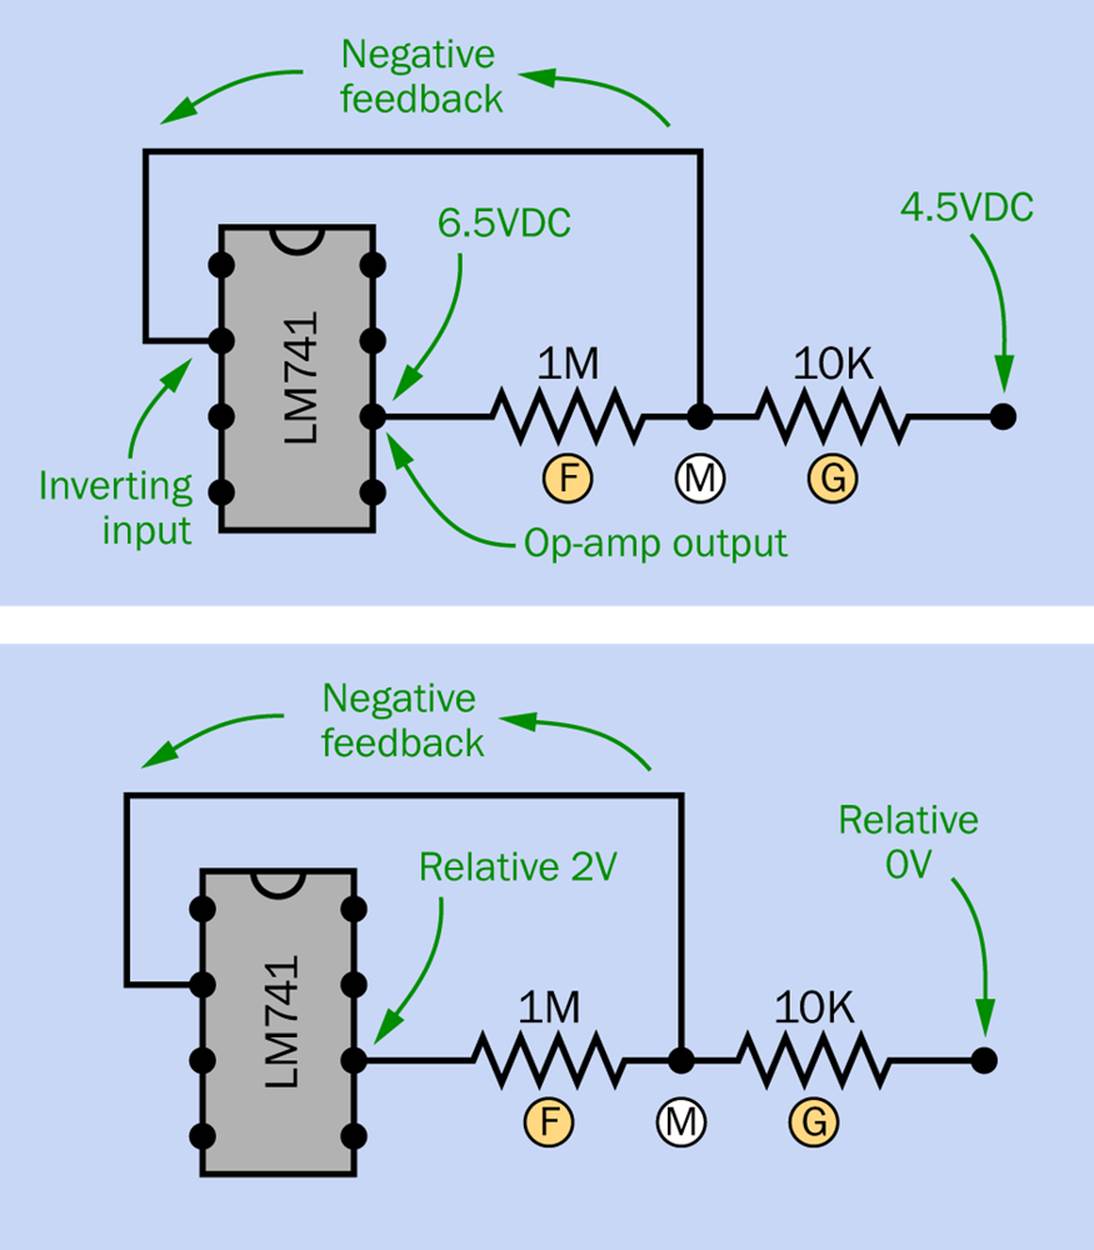 A section of the op-amp test circuit has been redrawn to clarify the function of the two resistors that control negative feedback.